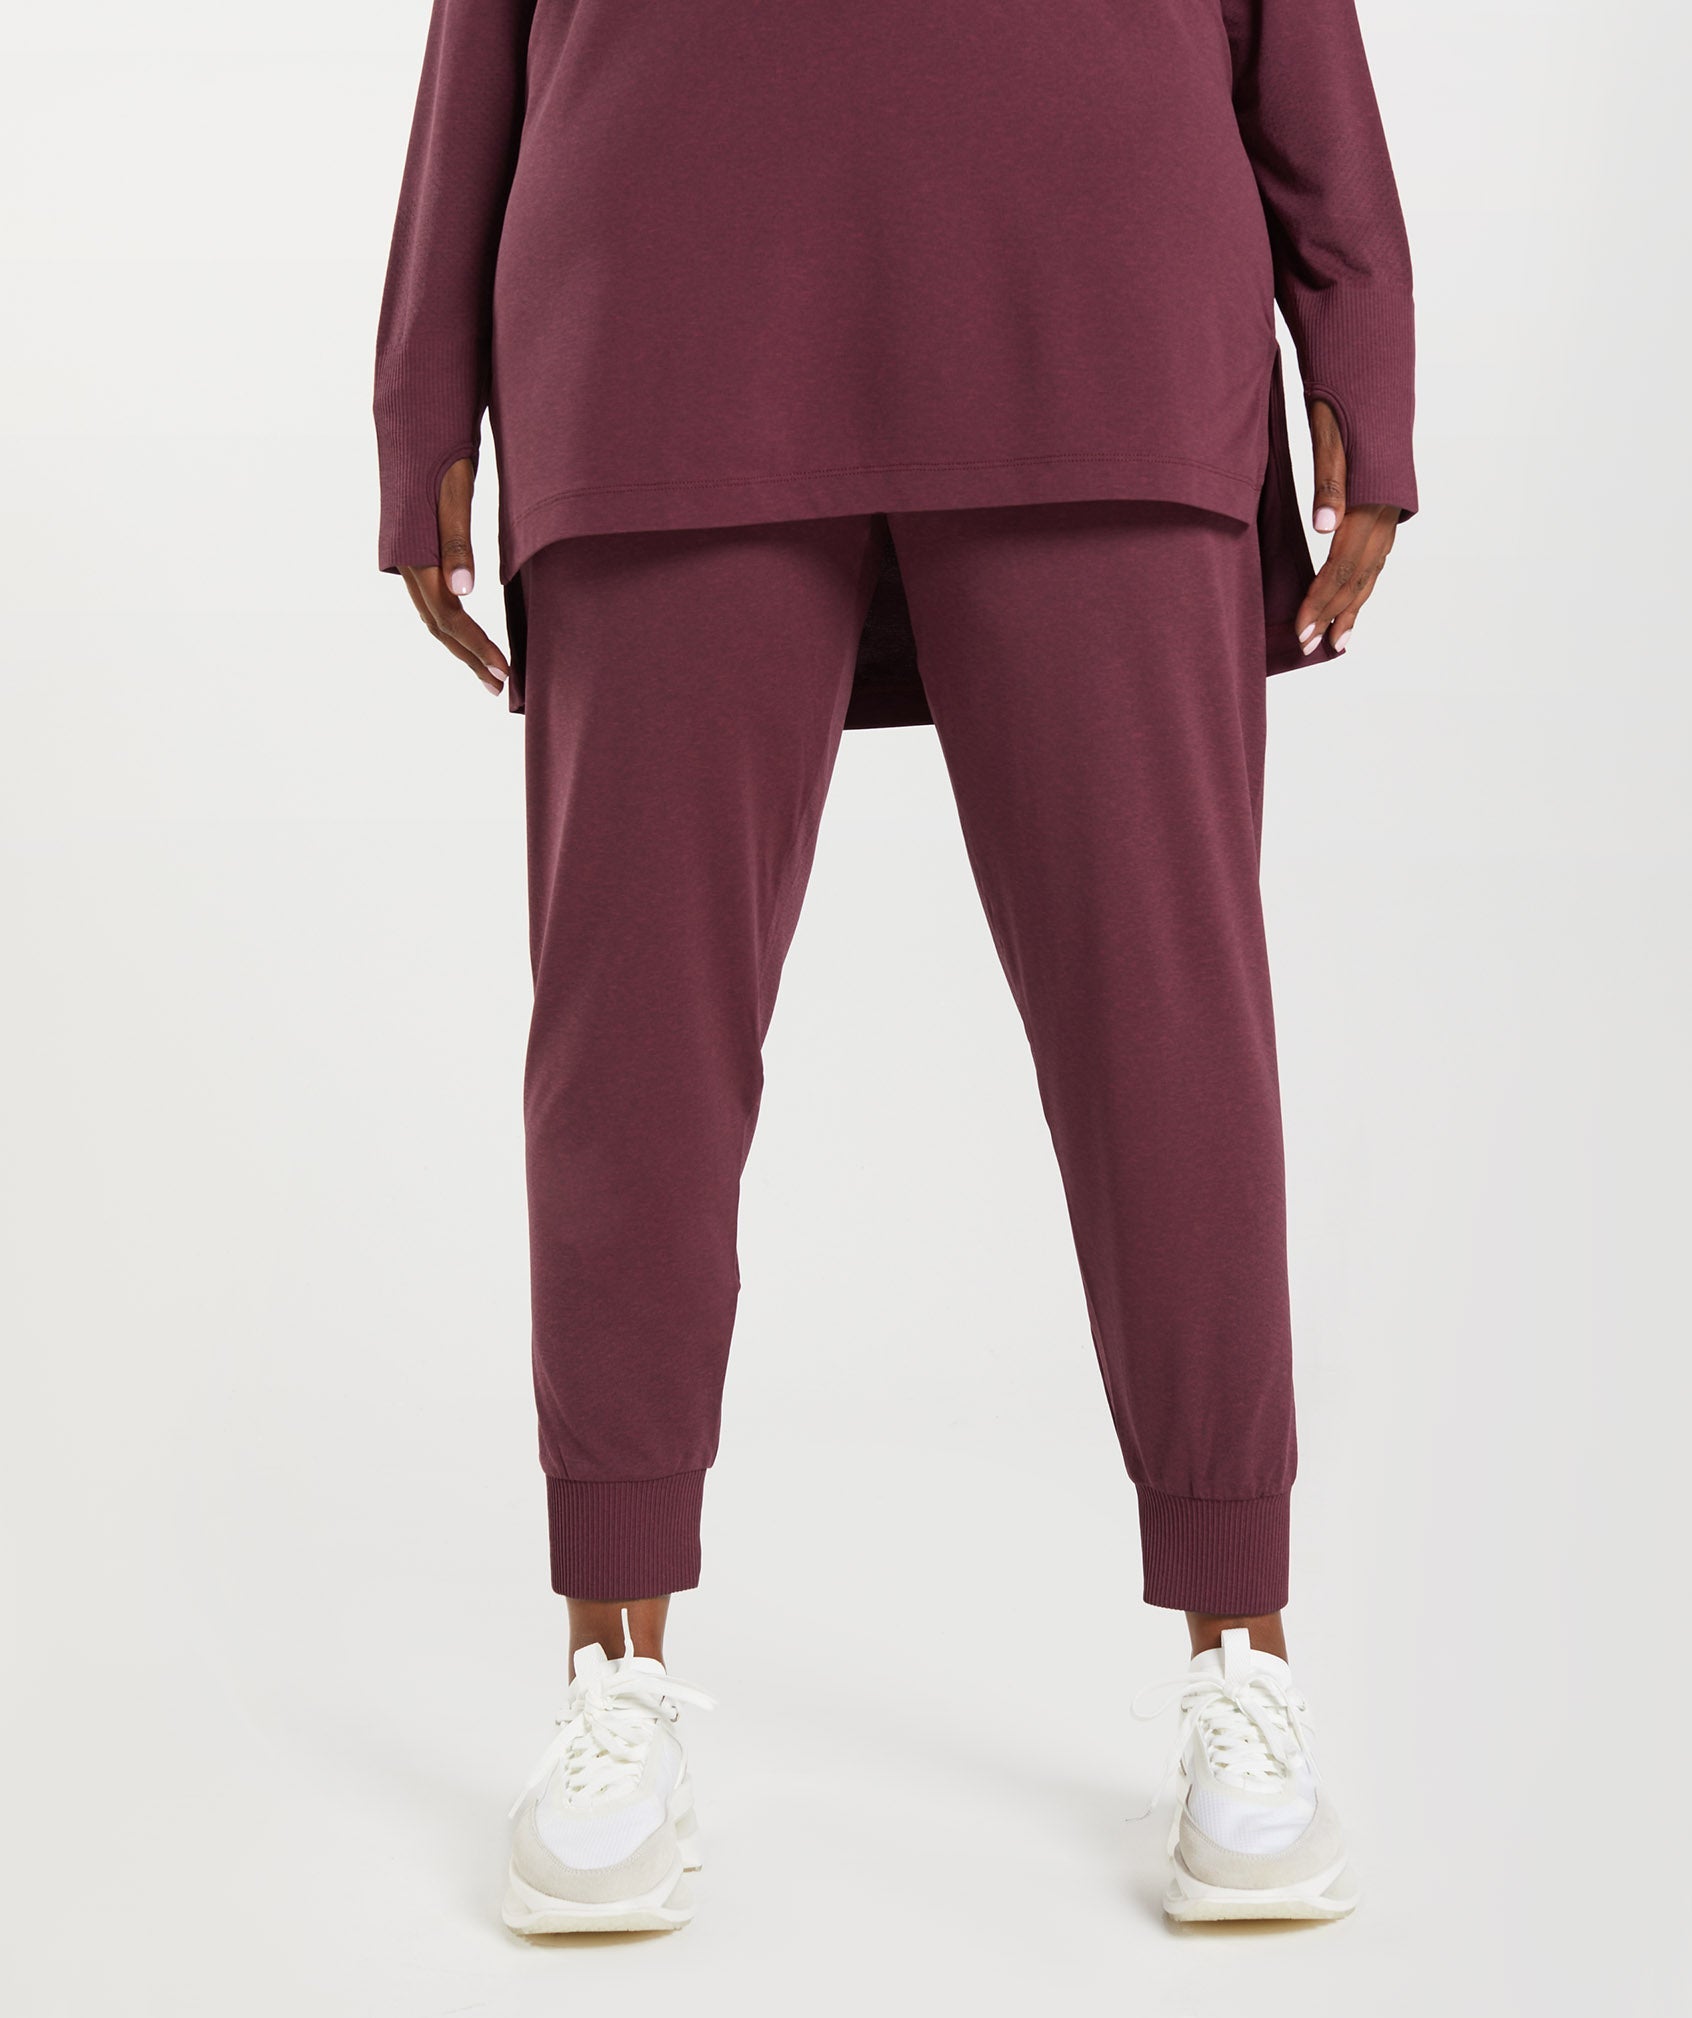 Vital Seamless 2.0 Joggers in Baked Maroon Marl - view 5